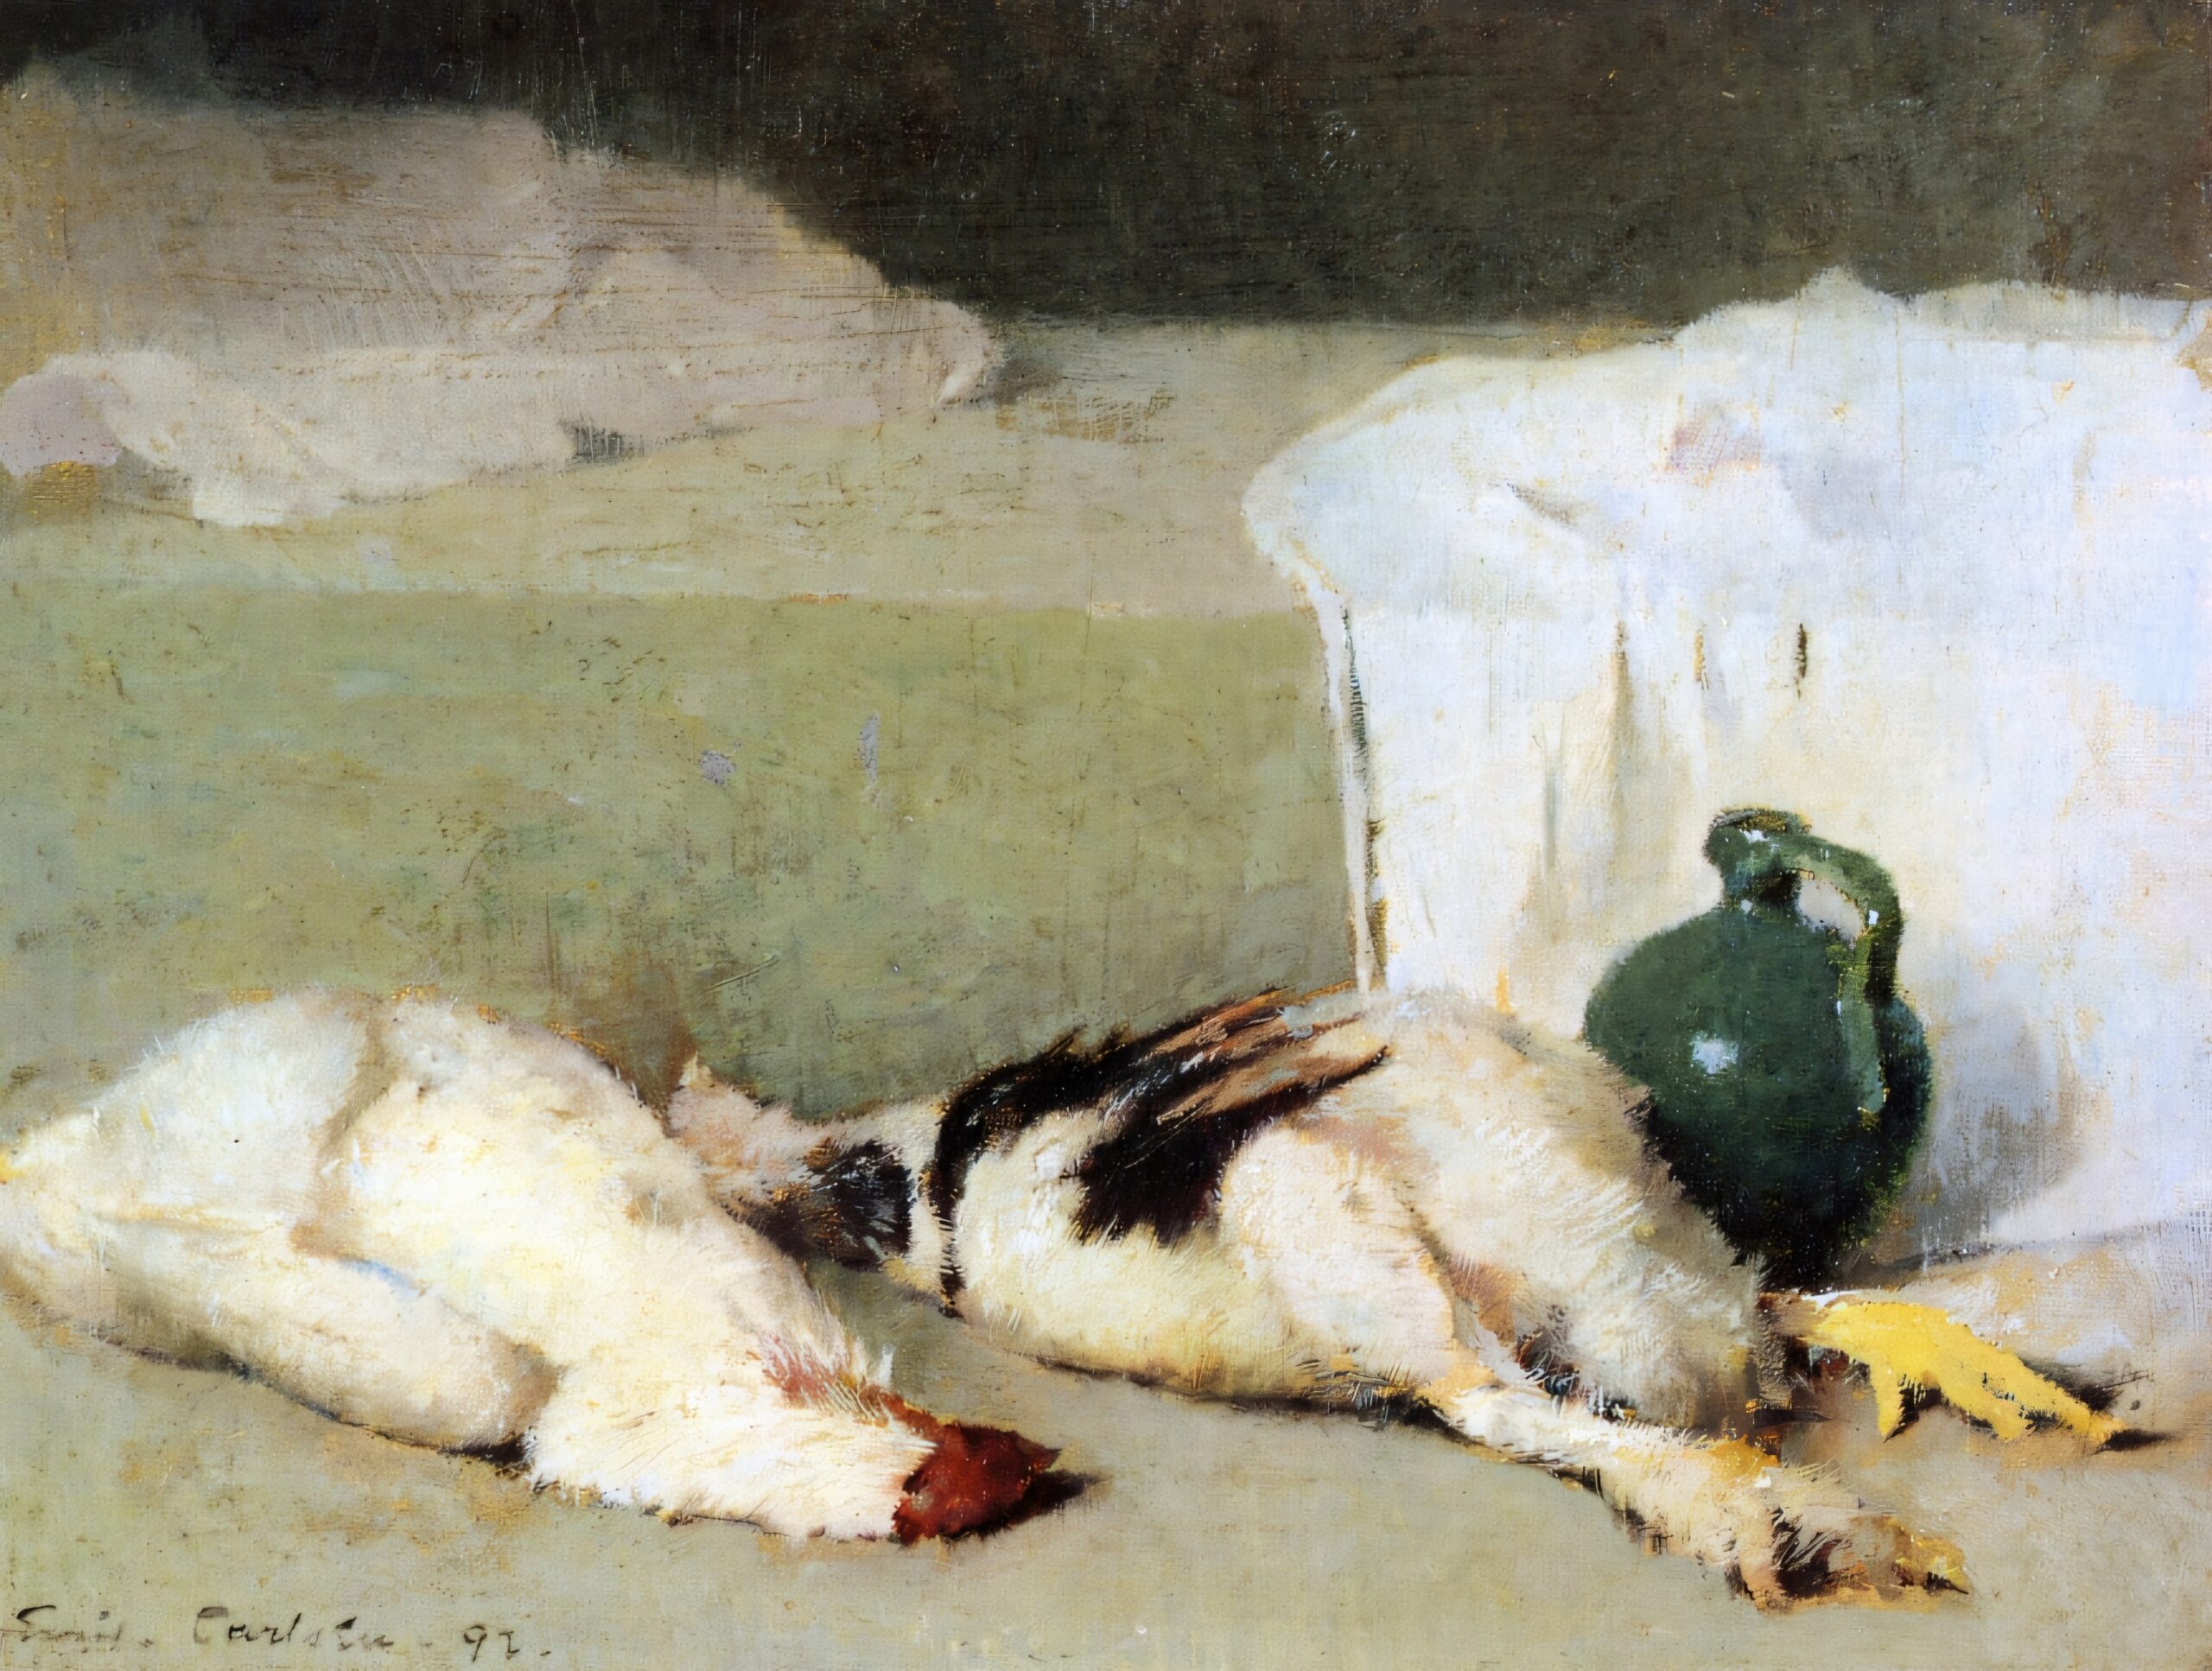 Emil Carlsen : Still life with game and ceramic pot, 1892.